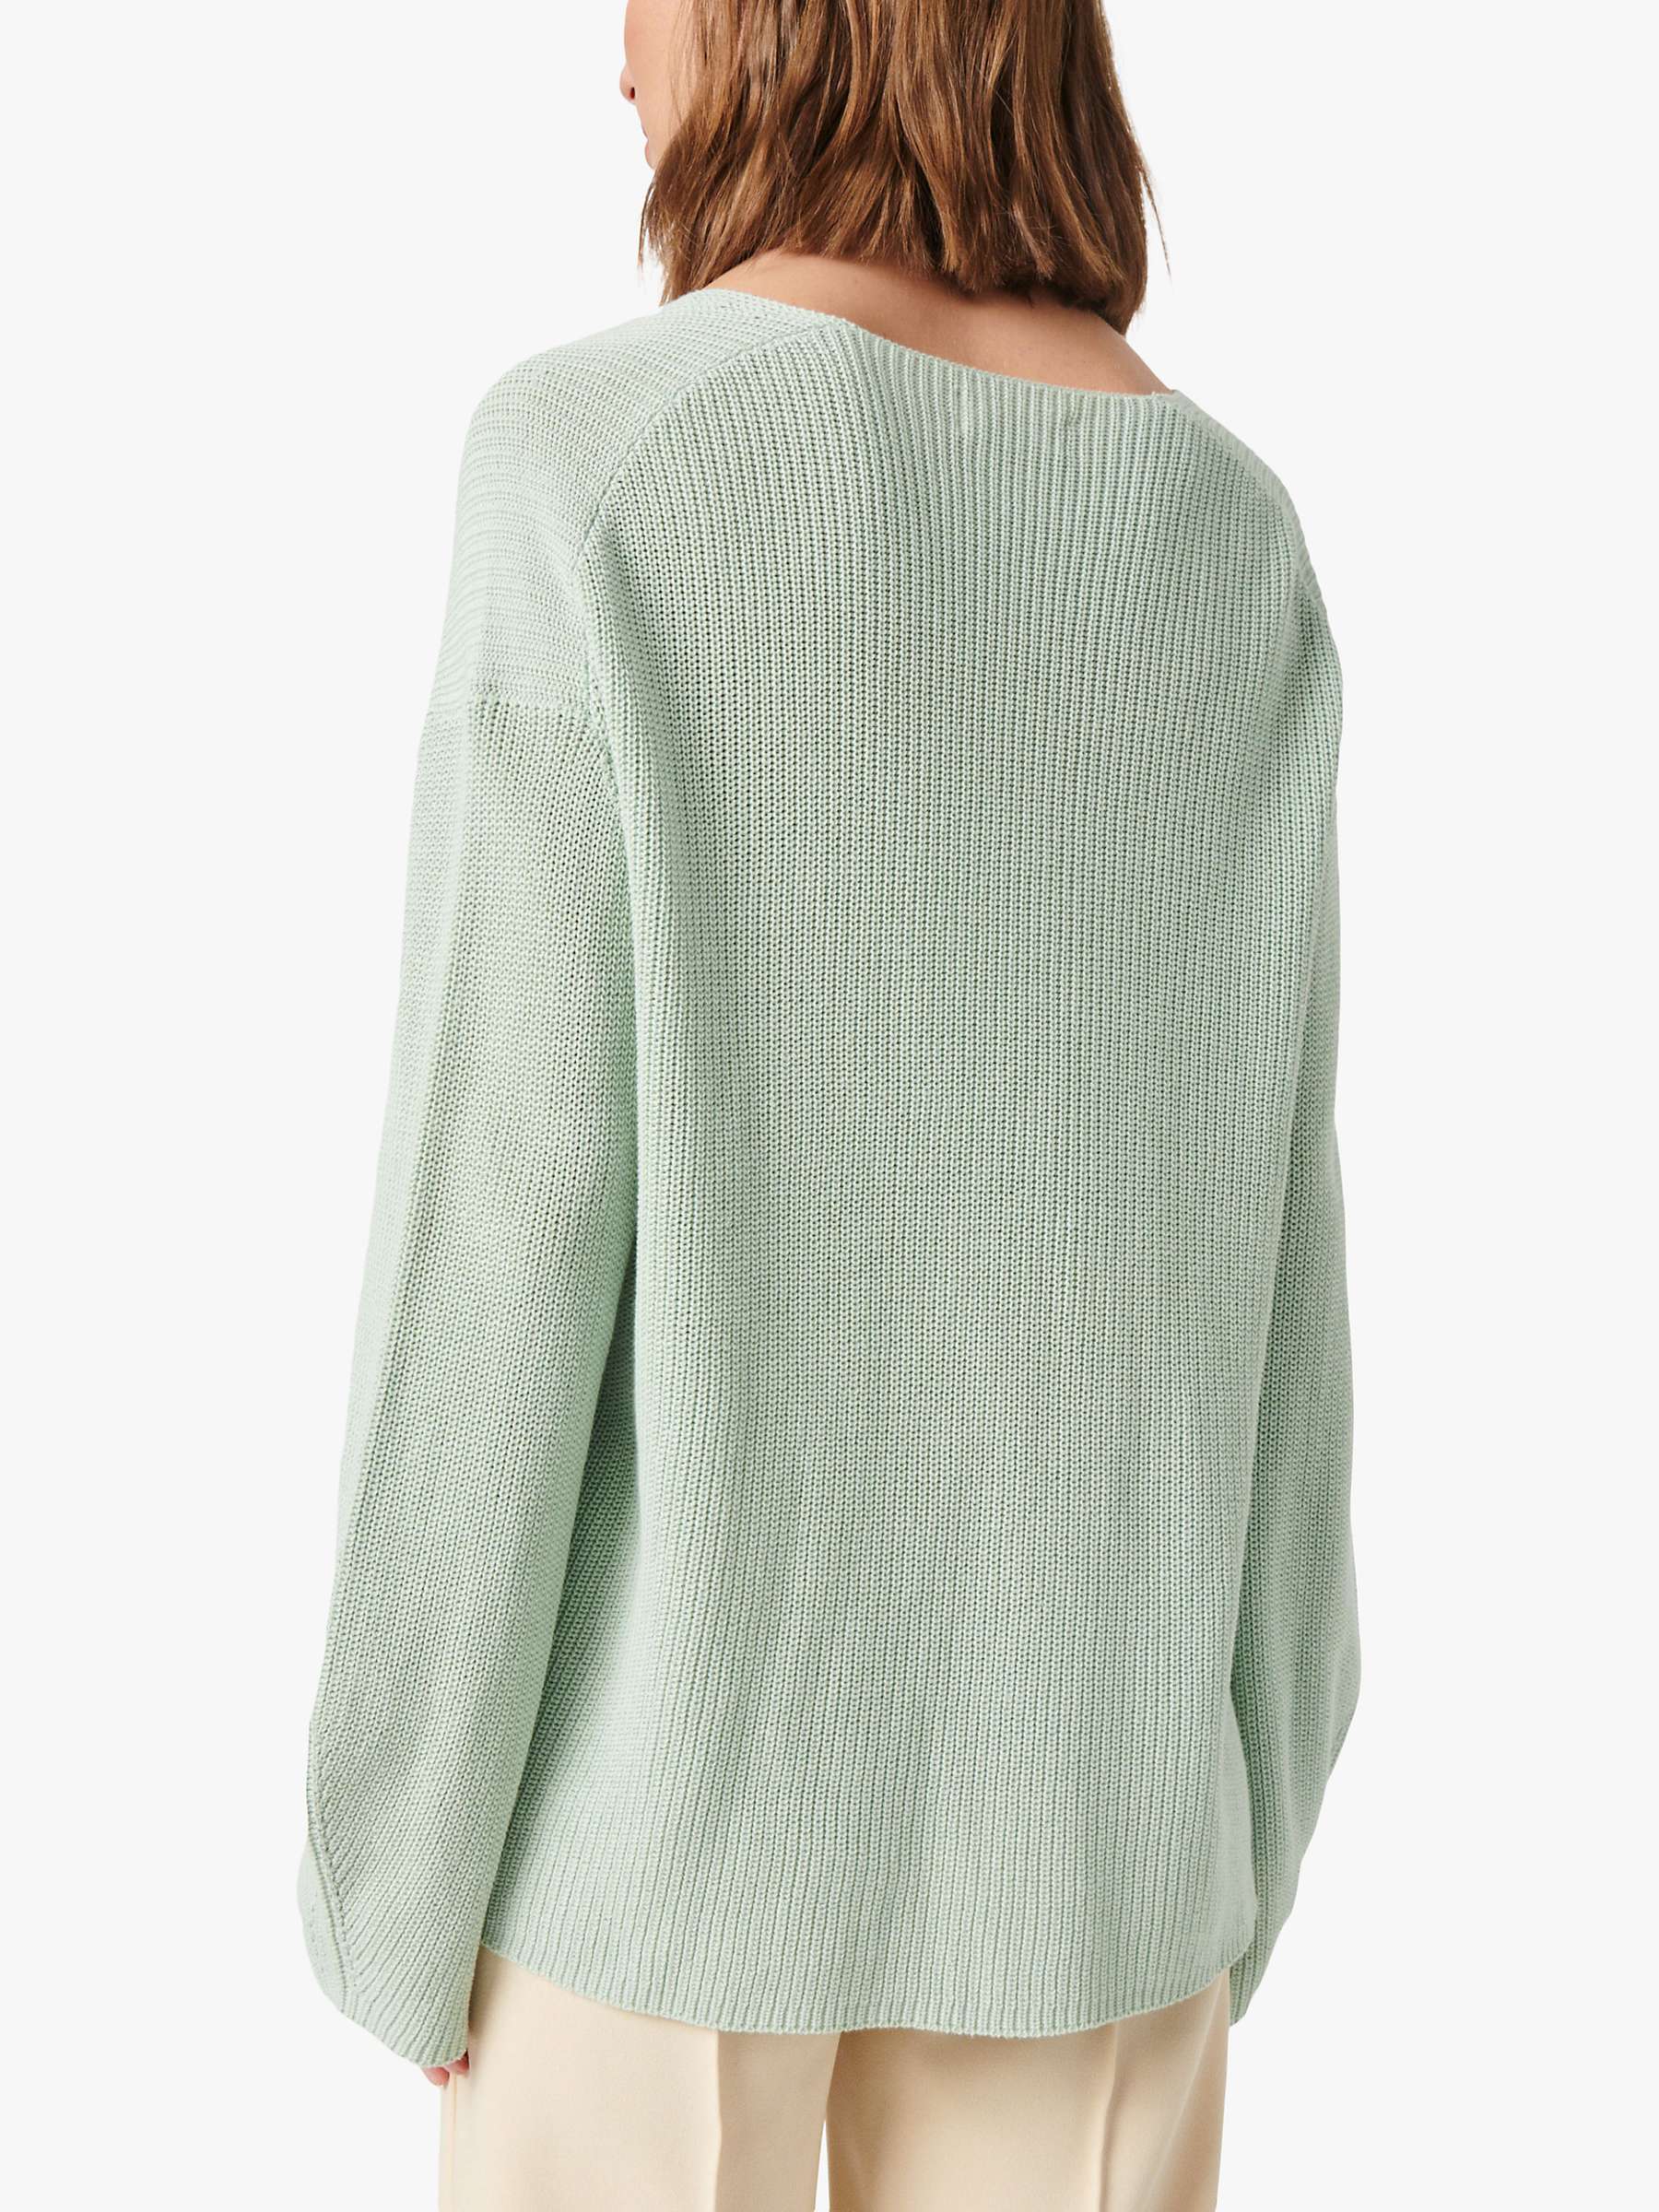 Buy Soaked In Luxury Tuesday V-Neck Relaxed Fit Jumper, Surf Spray Online at johnlewis.com